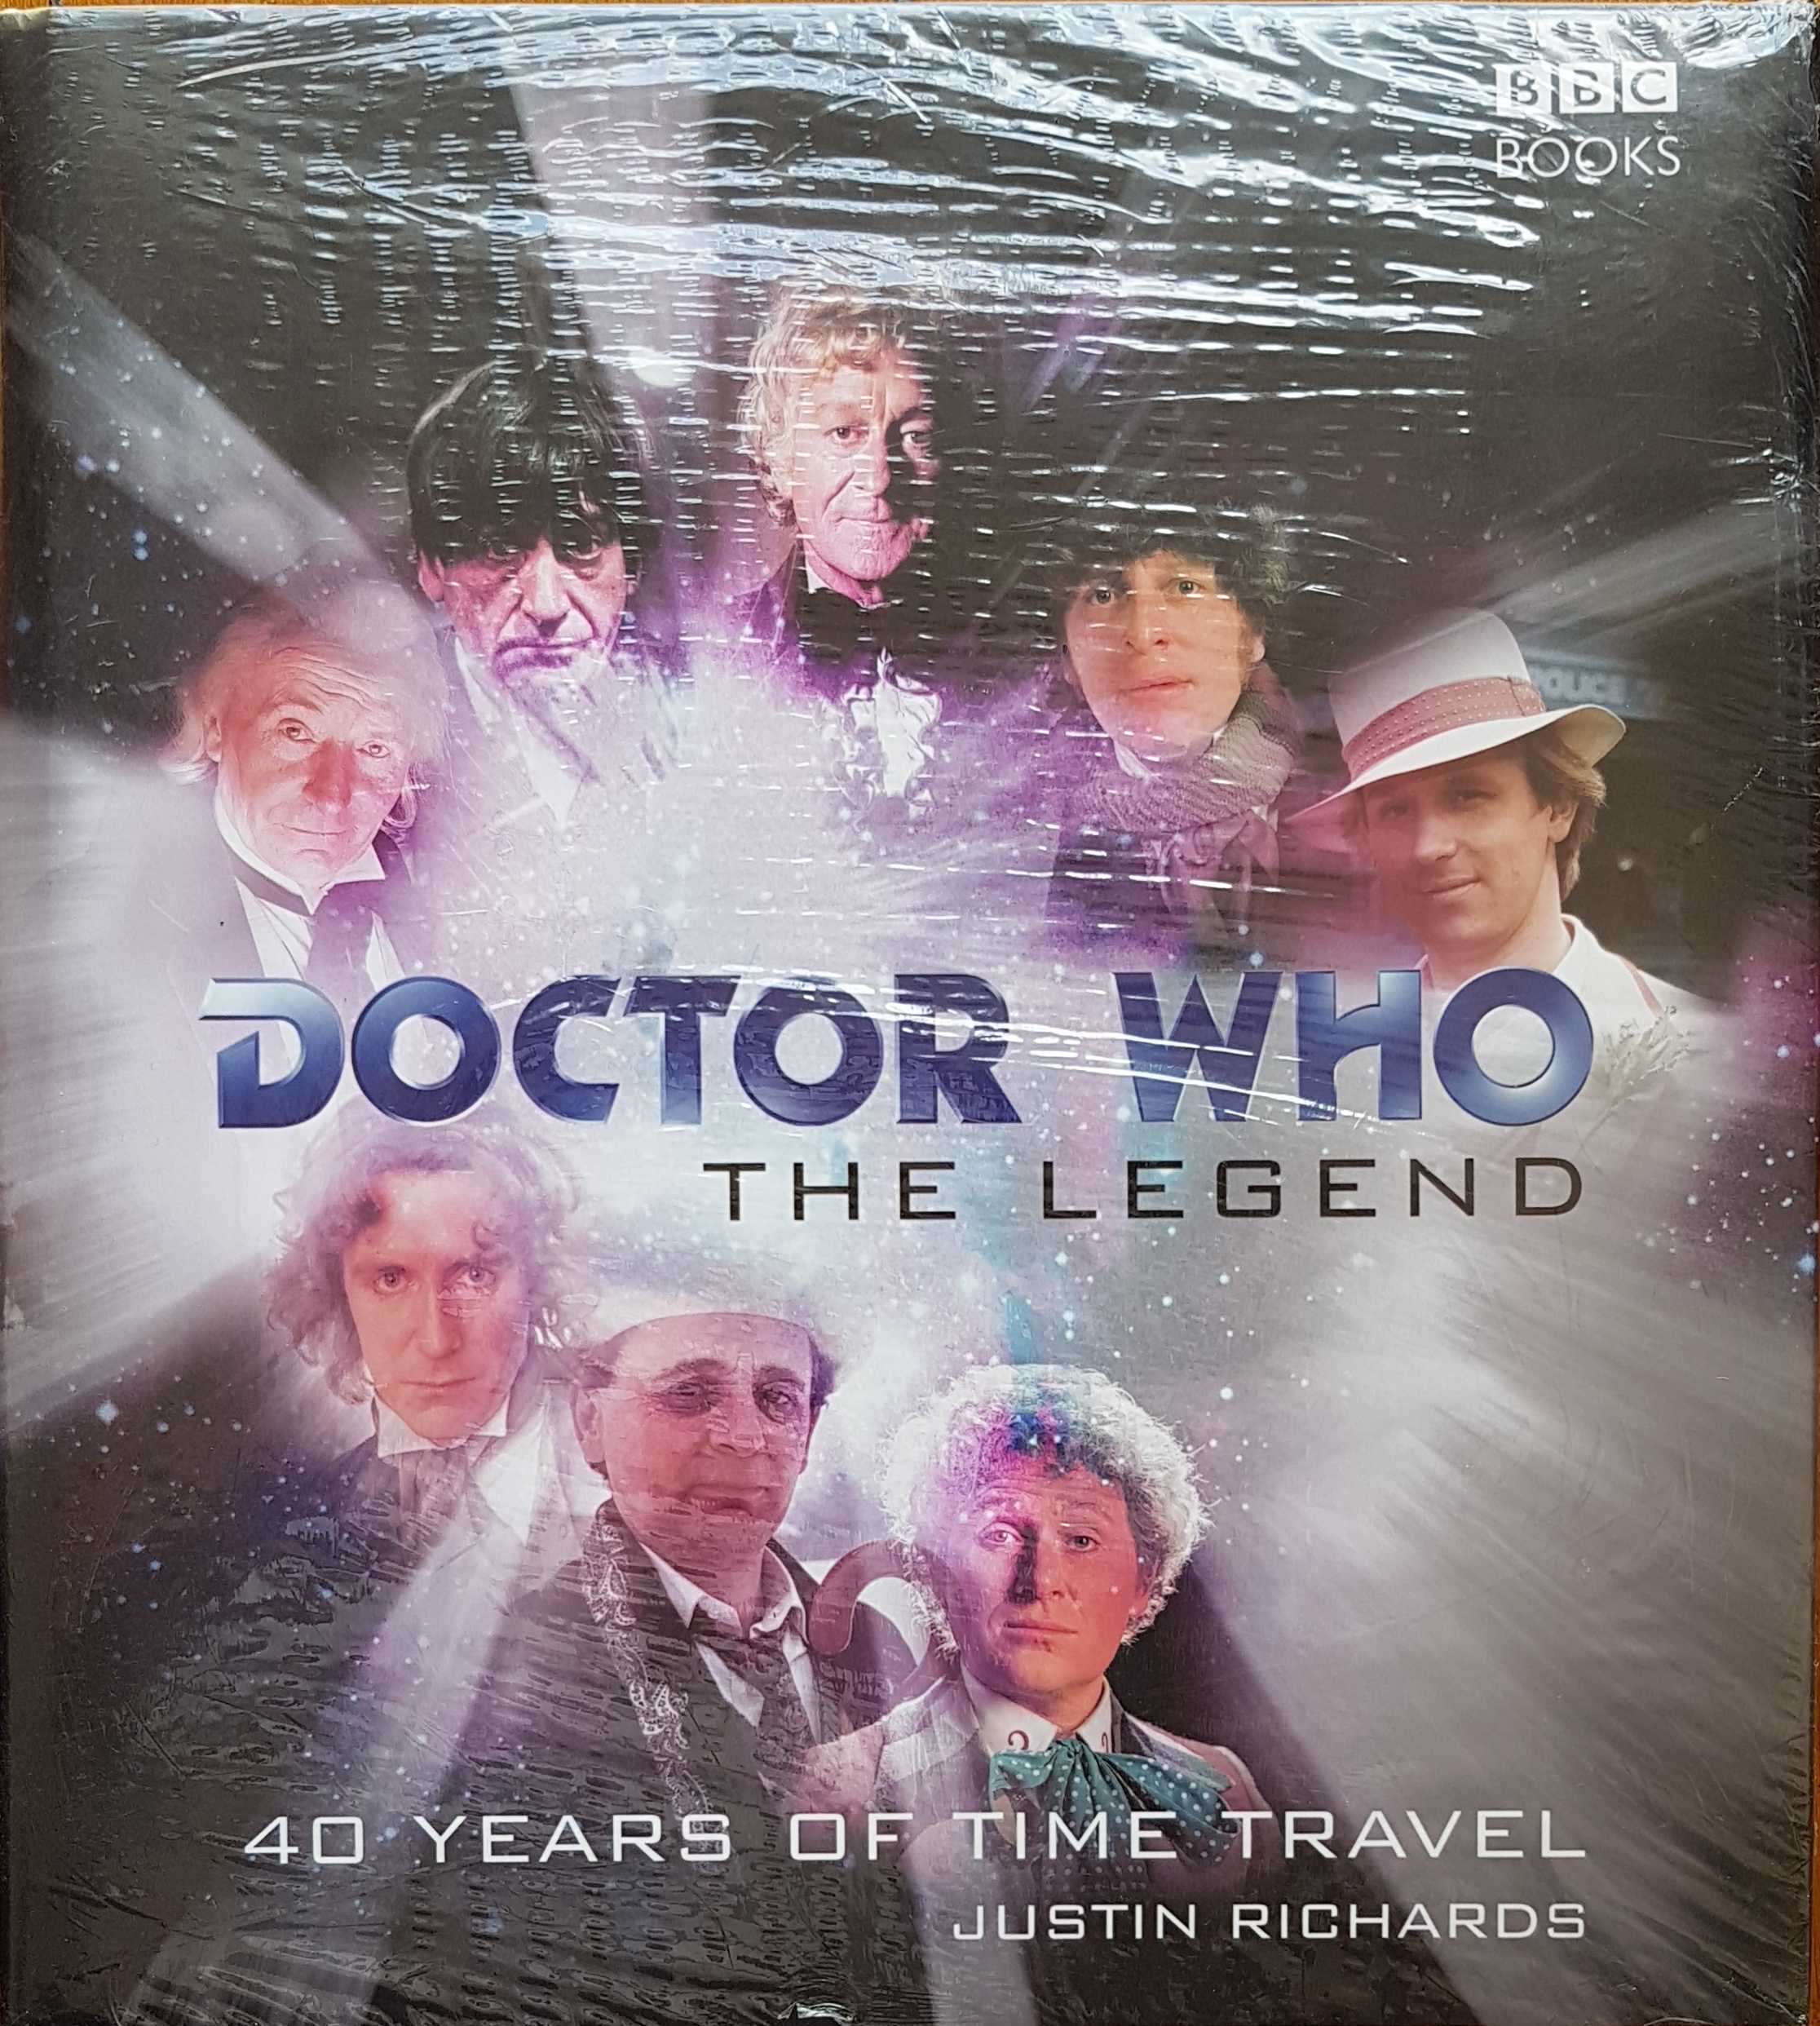 Picture of 0-563-48602-3 Doctor Who - The legend by artist Justin Richards from the BBC books - Records and Tapes library